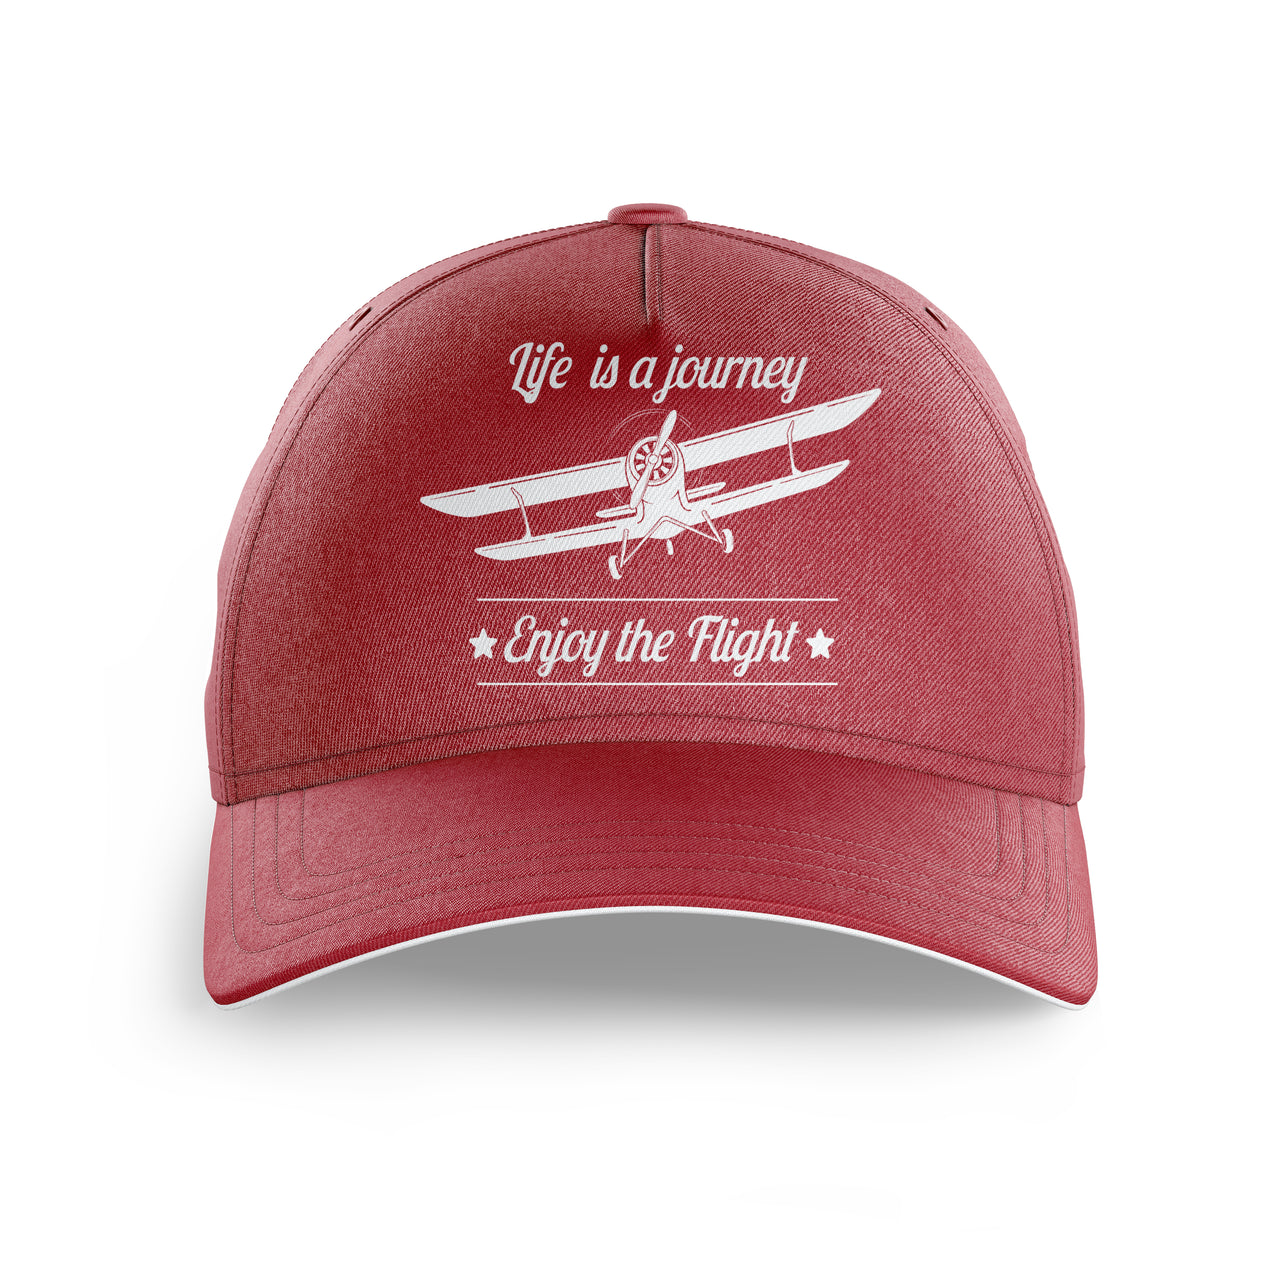 Life is a journey Enjoy the Flight Printed Hats